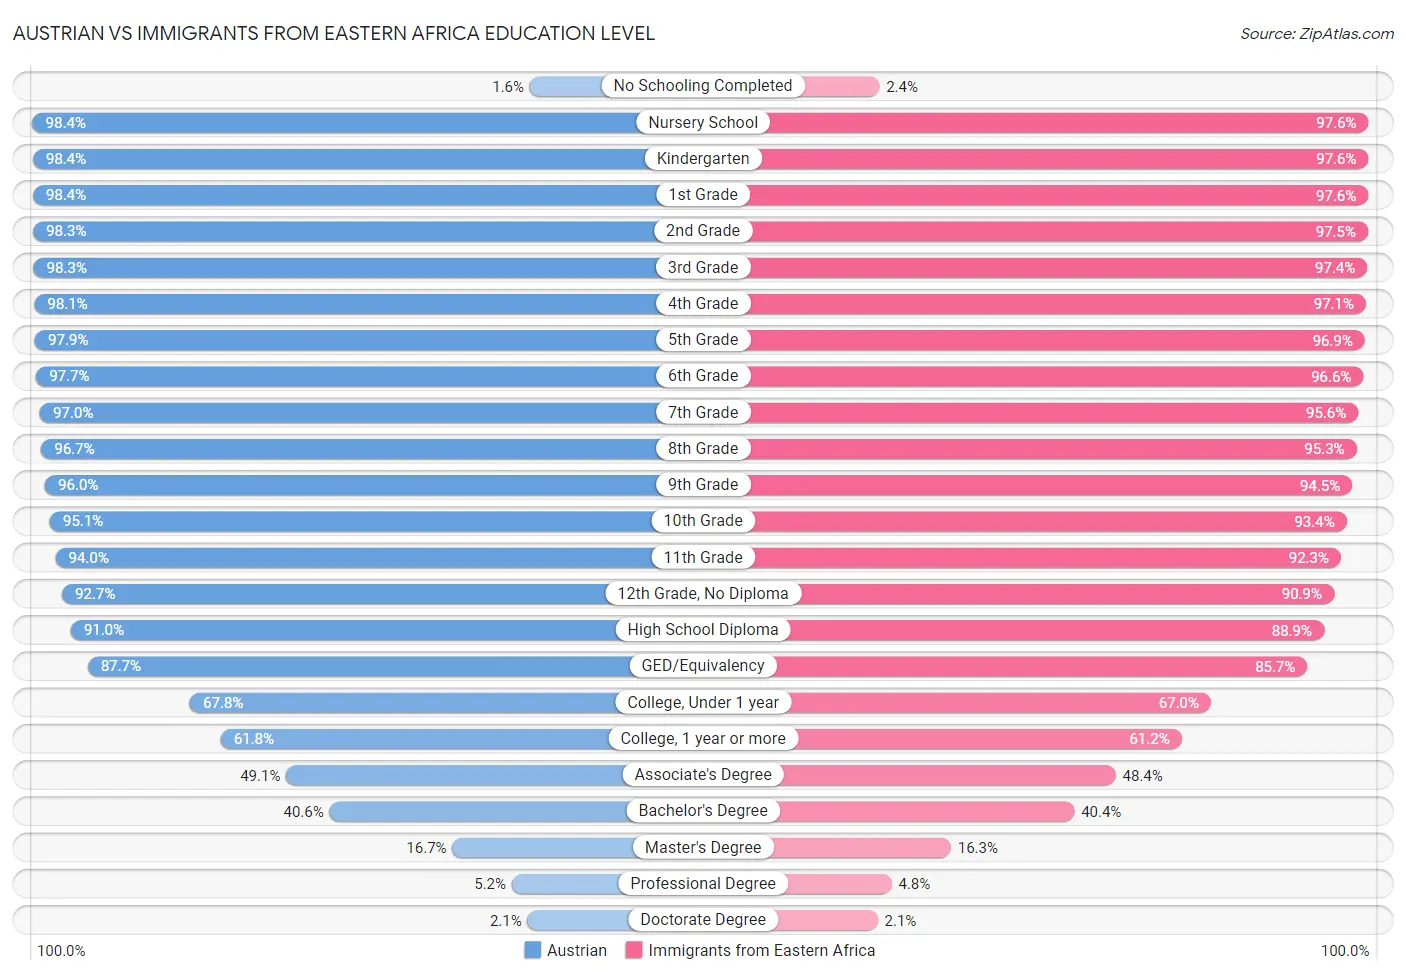 Austrian vs Immigrants from Eastern Africa Education Level